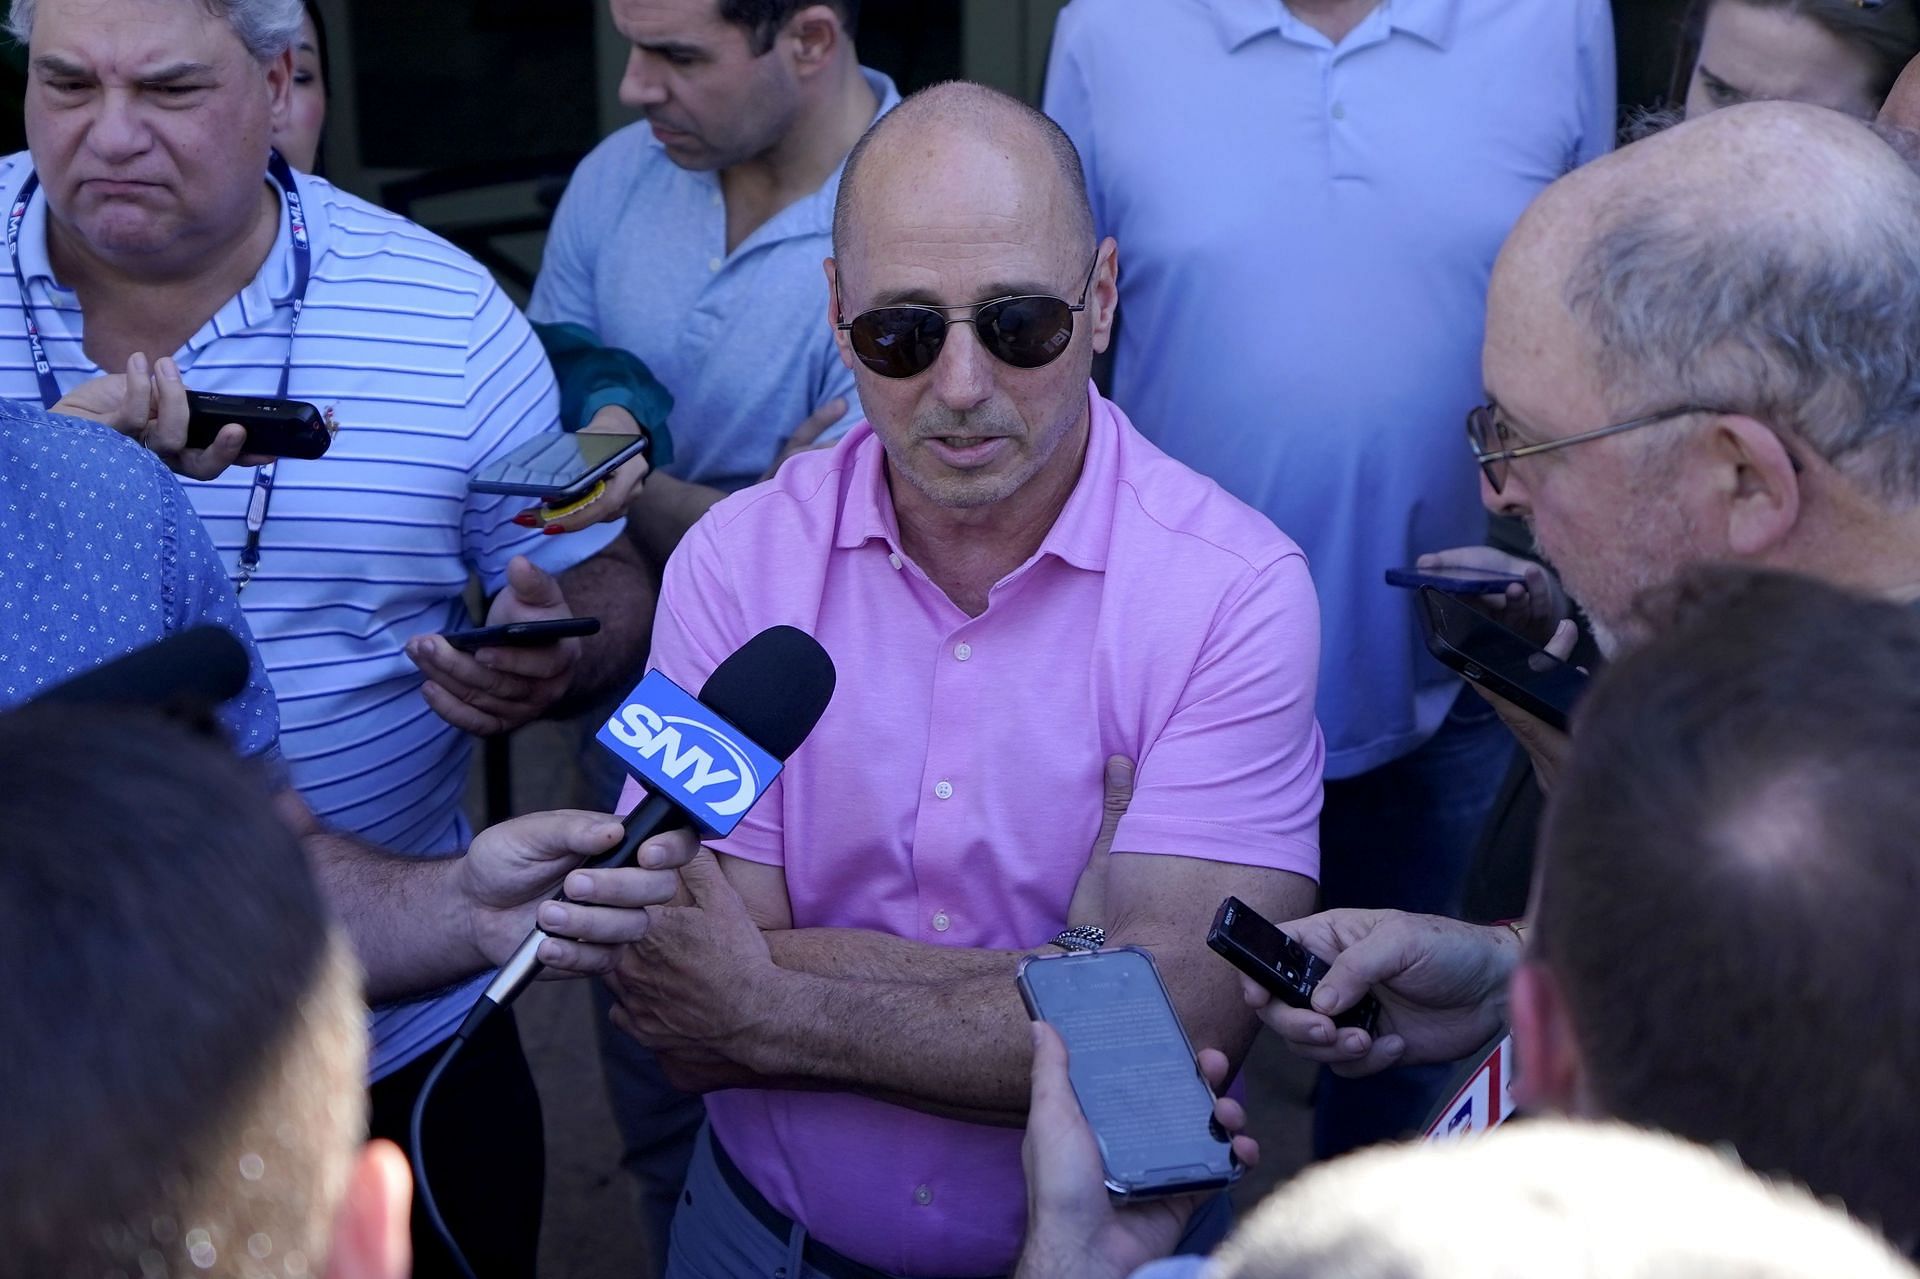 Brian Cashman stated during a press conference, that the organization if running &quot;pretty good.&quot;